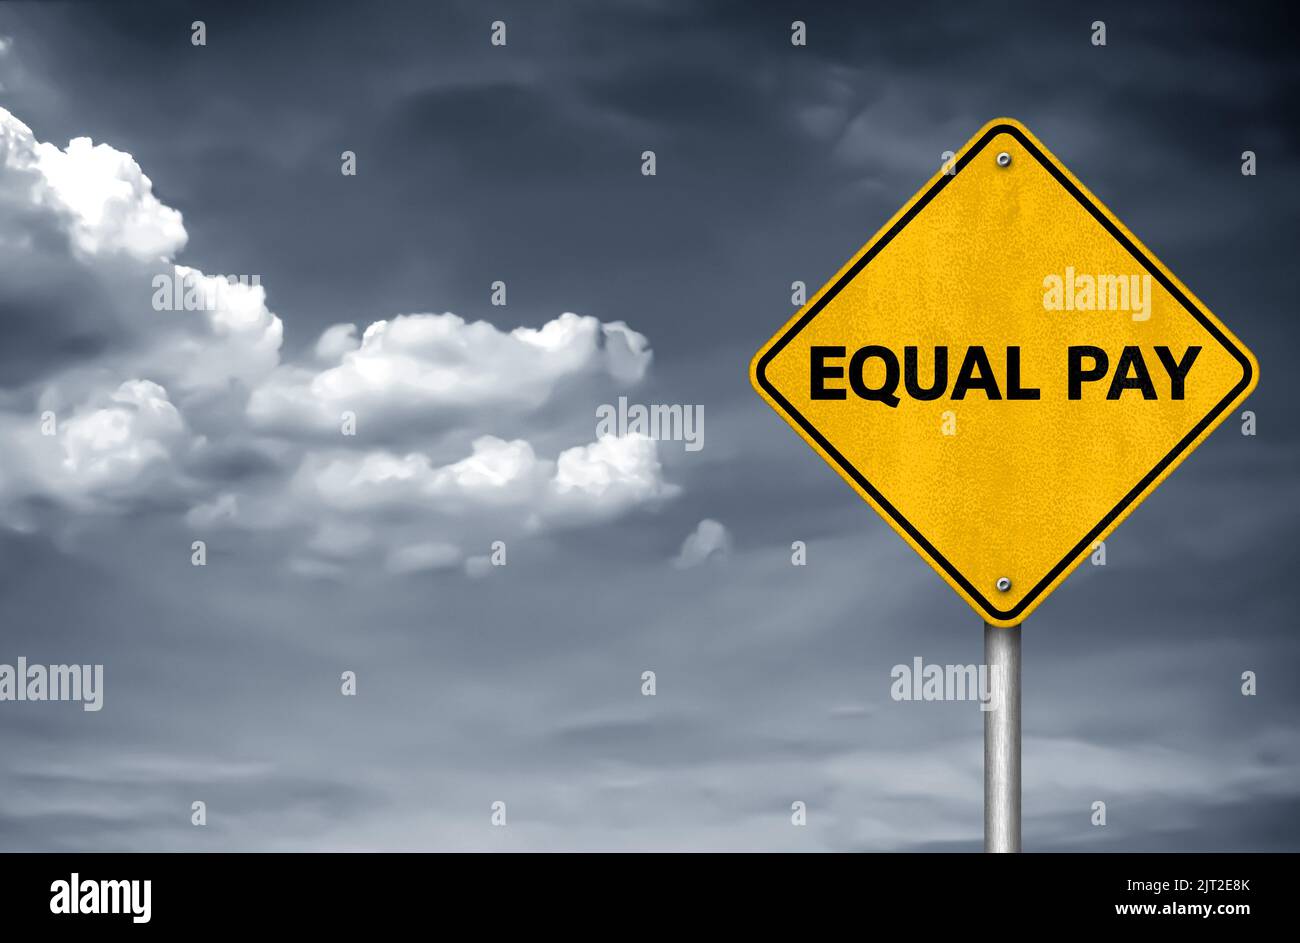 Equal Pay - Gender pay gap Stock Photo